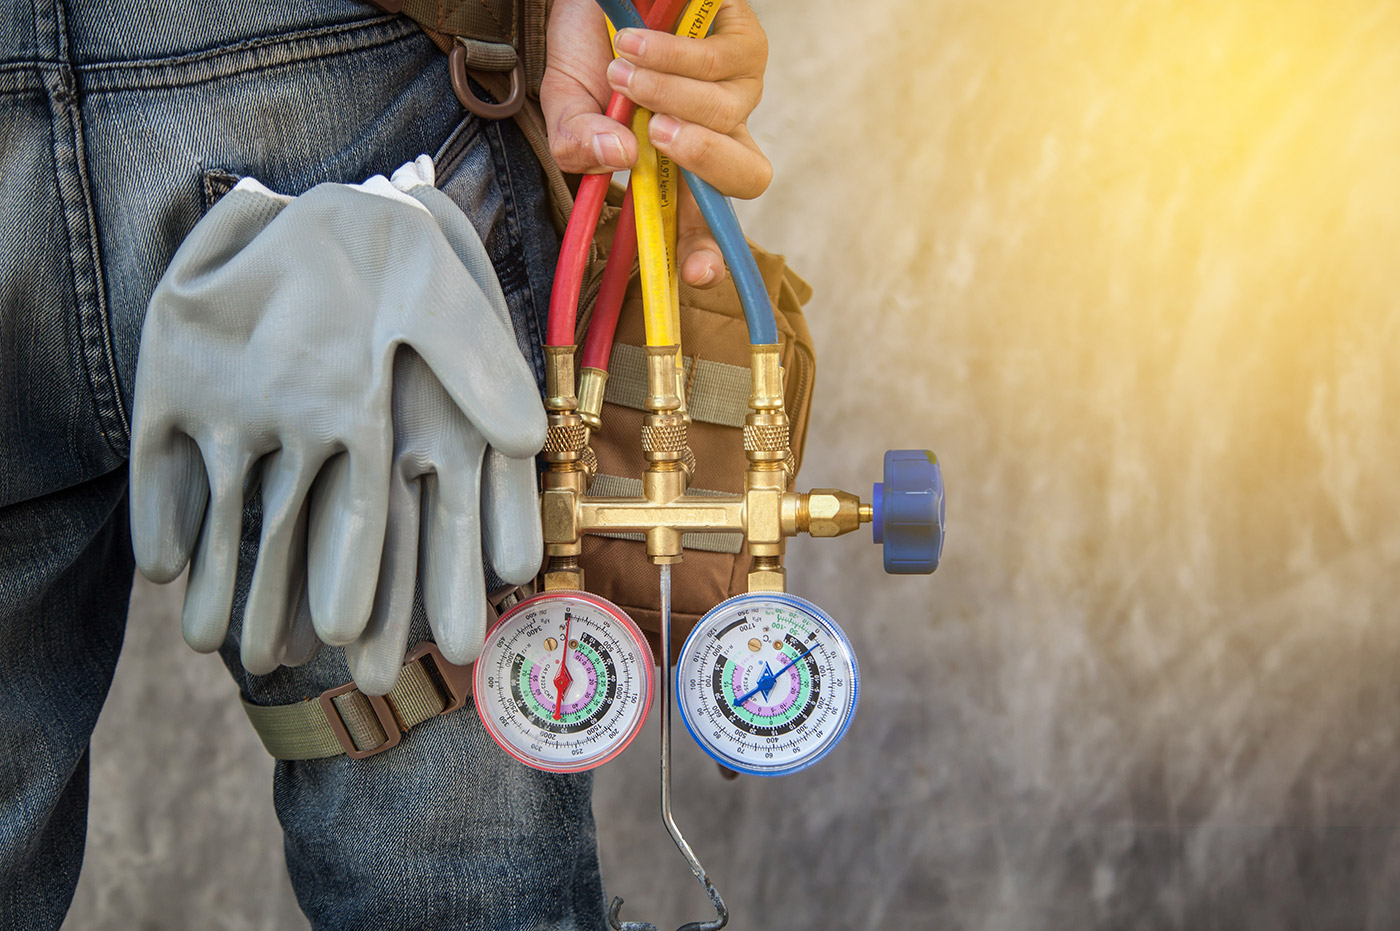 A worker in jeans holding some pressure gauges.